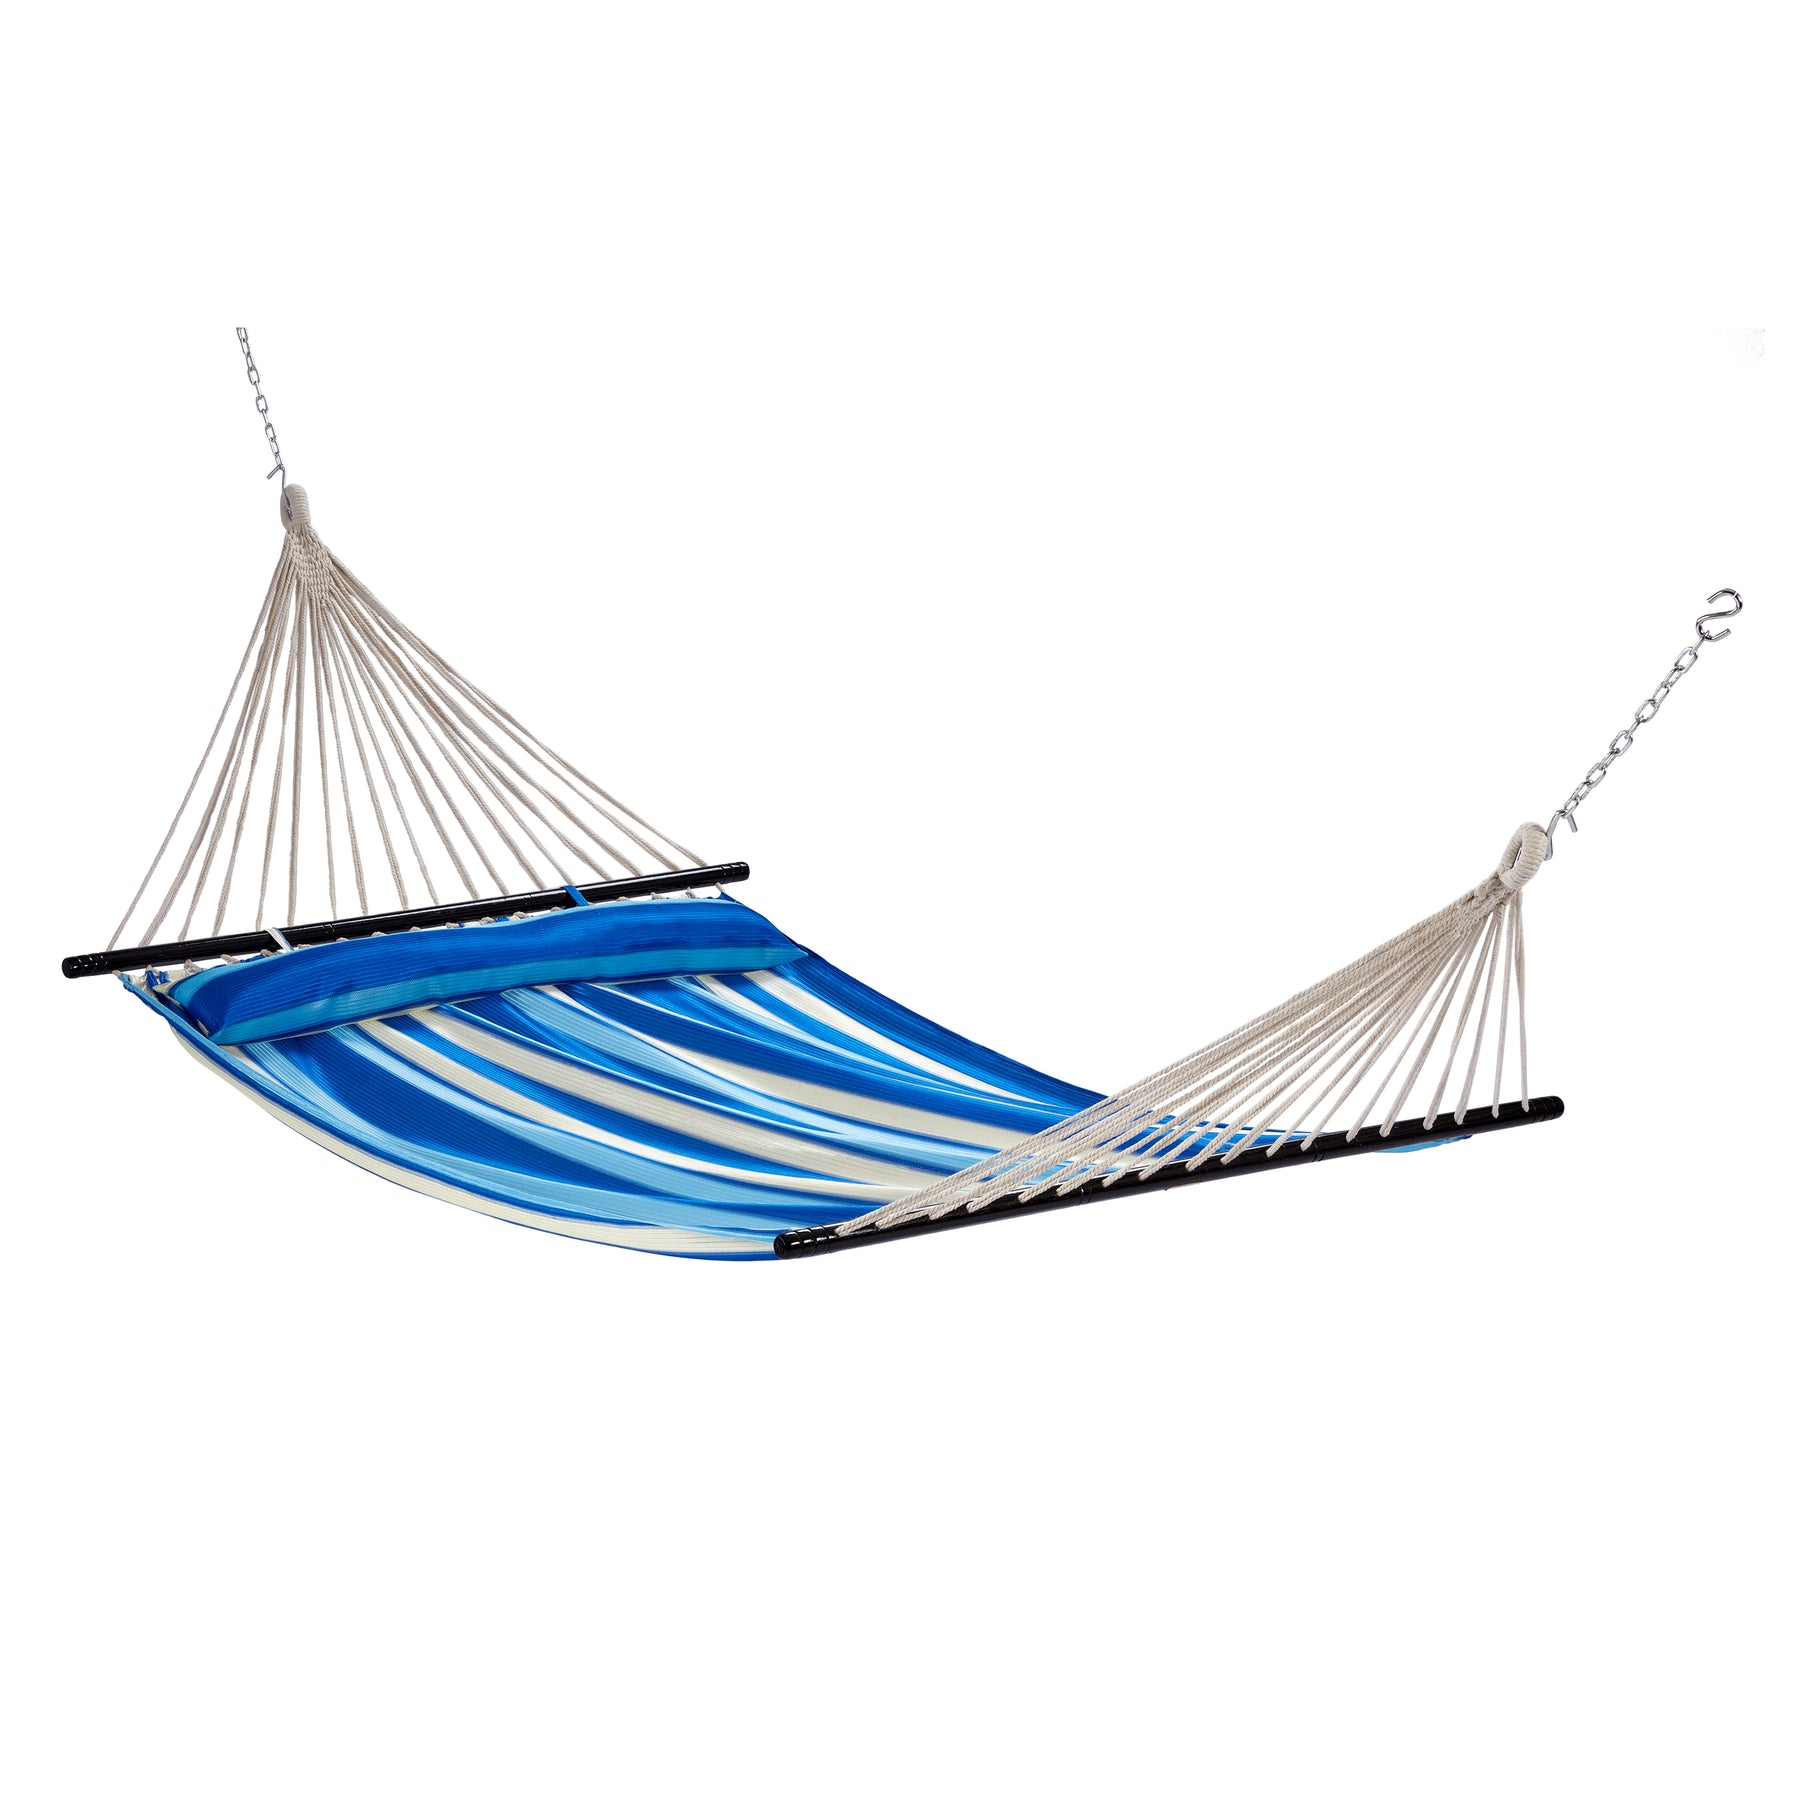 Bliss Hammocks 55-inch Wide Ventaleen Breathable Performance 2 Person Hammock with Pillow with blue and white stripes. S-hooks and chains are attached to the rope loops at the ends.